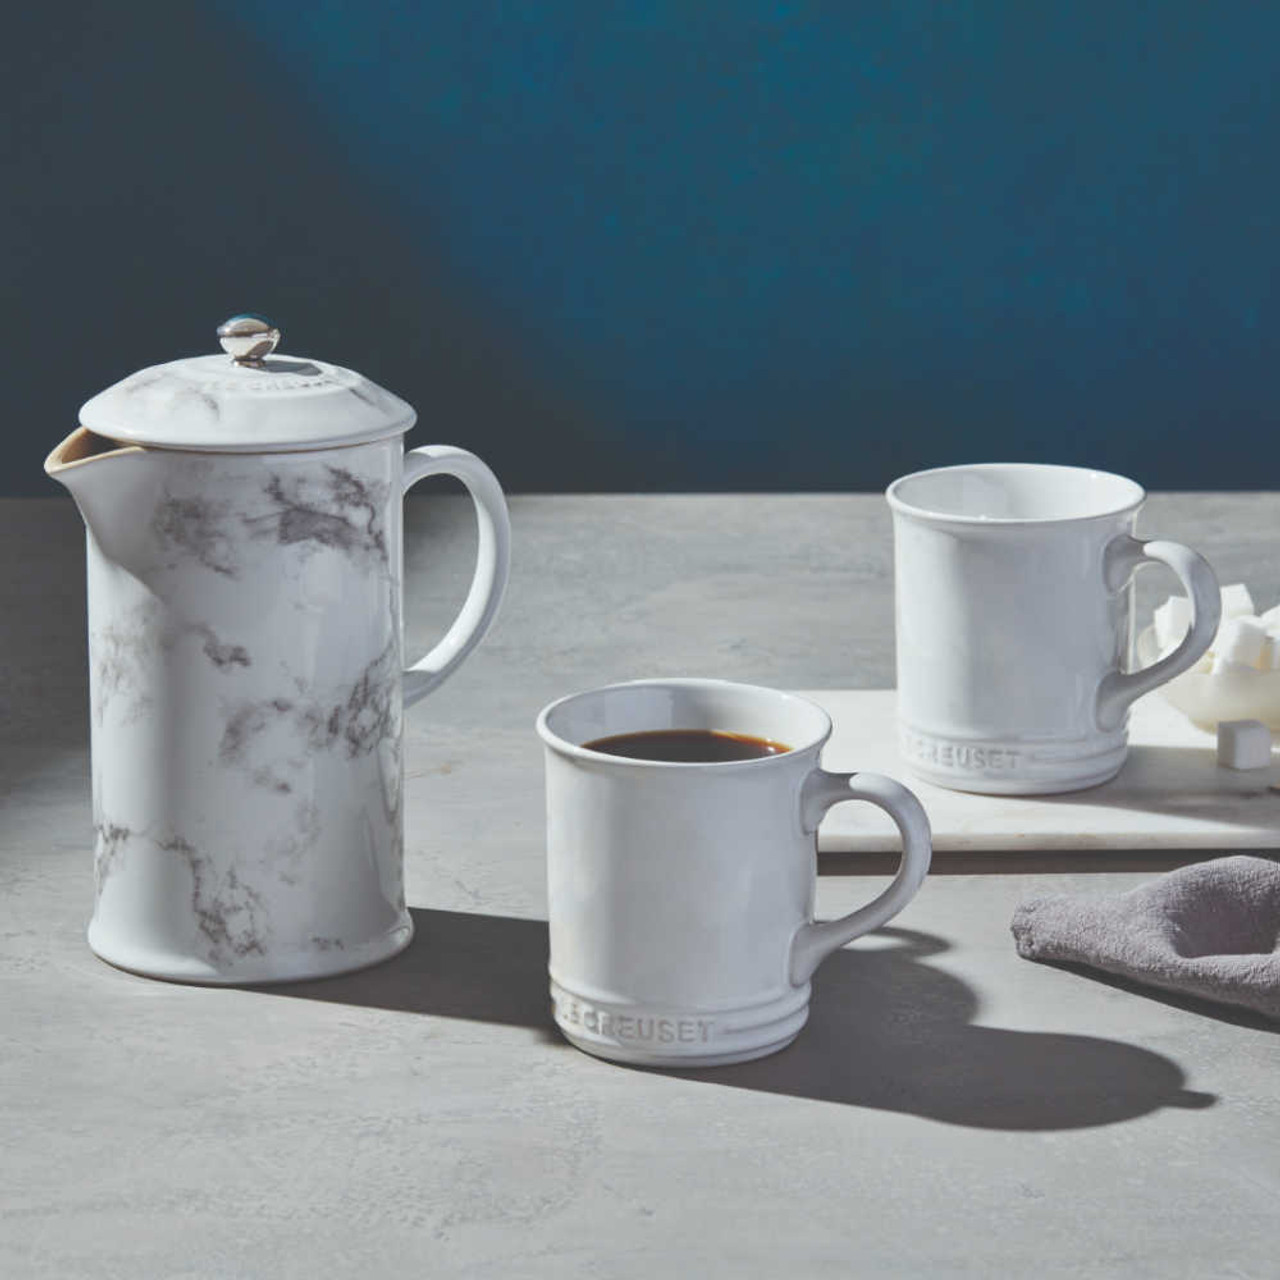 Le Creuset Marble Collection French Press